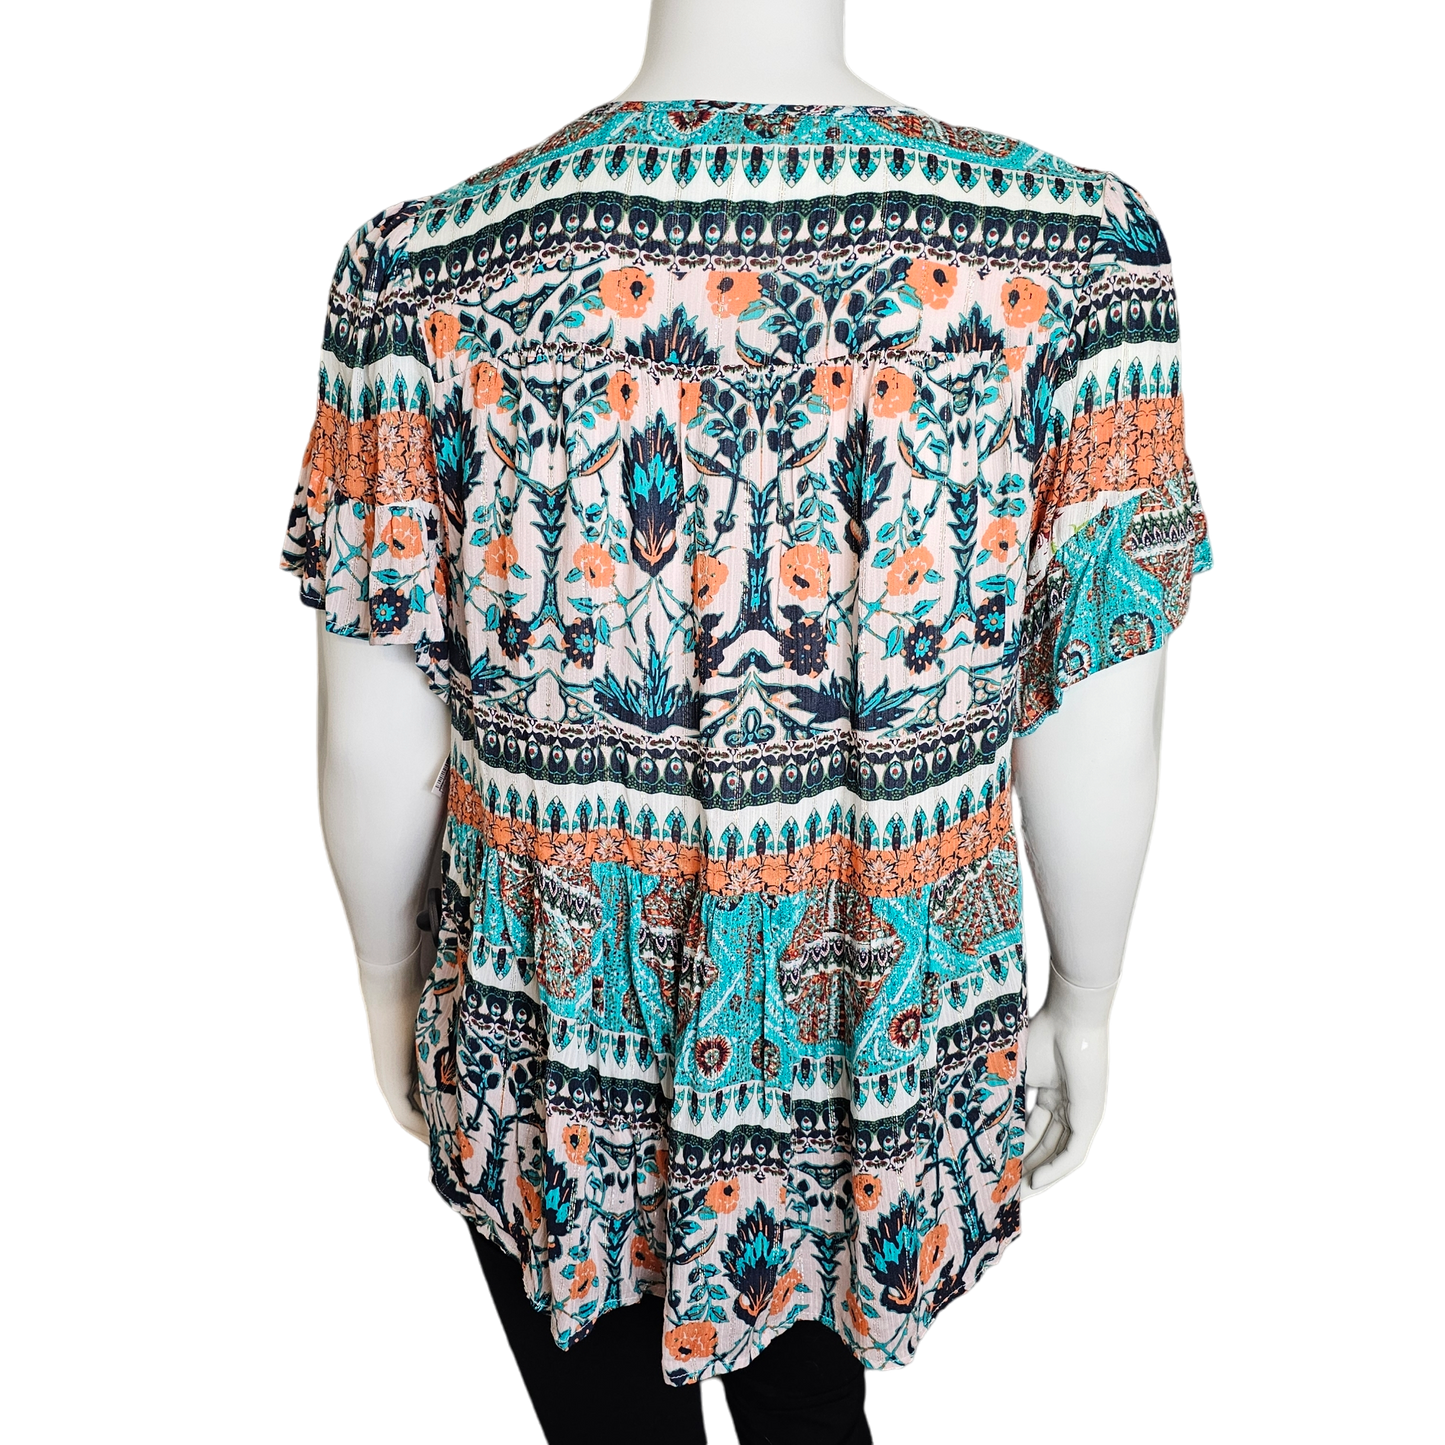 Top Short Sleeve By CULT OF DESIGN Size: 1x